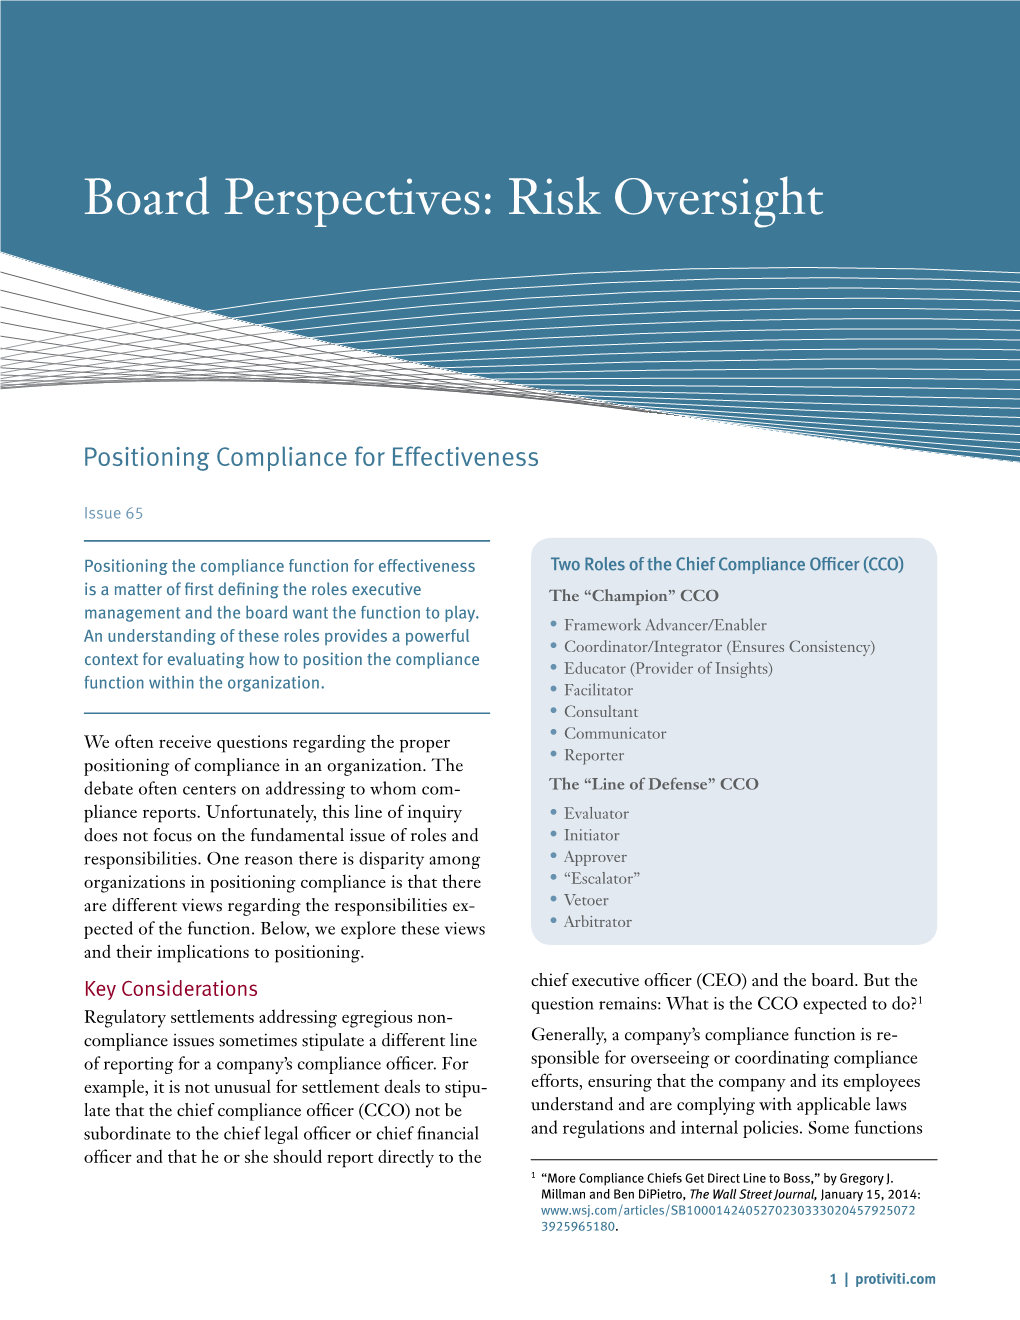 Positioning Compliance for Effectiveness